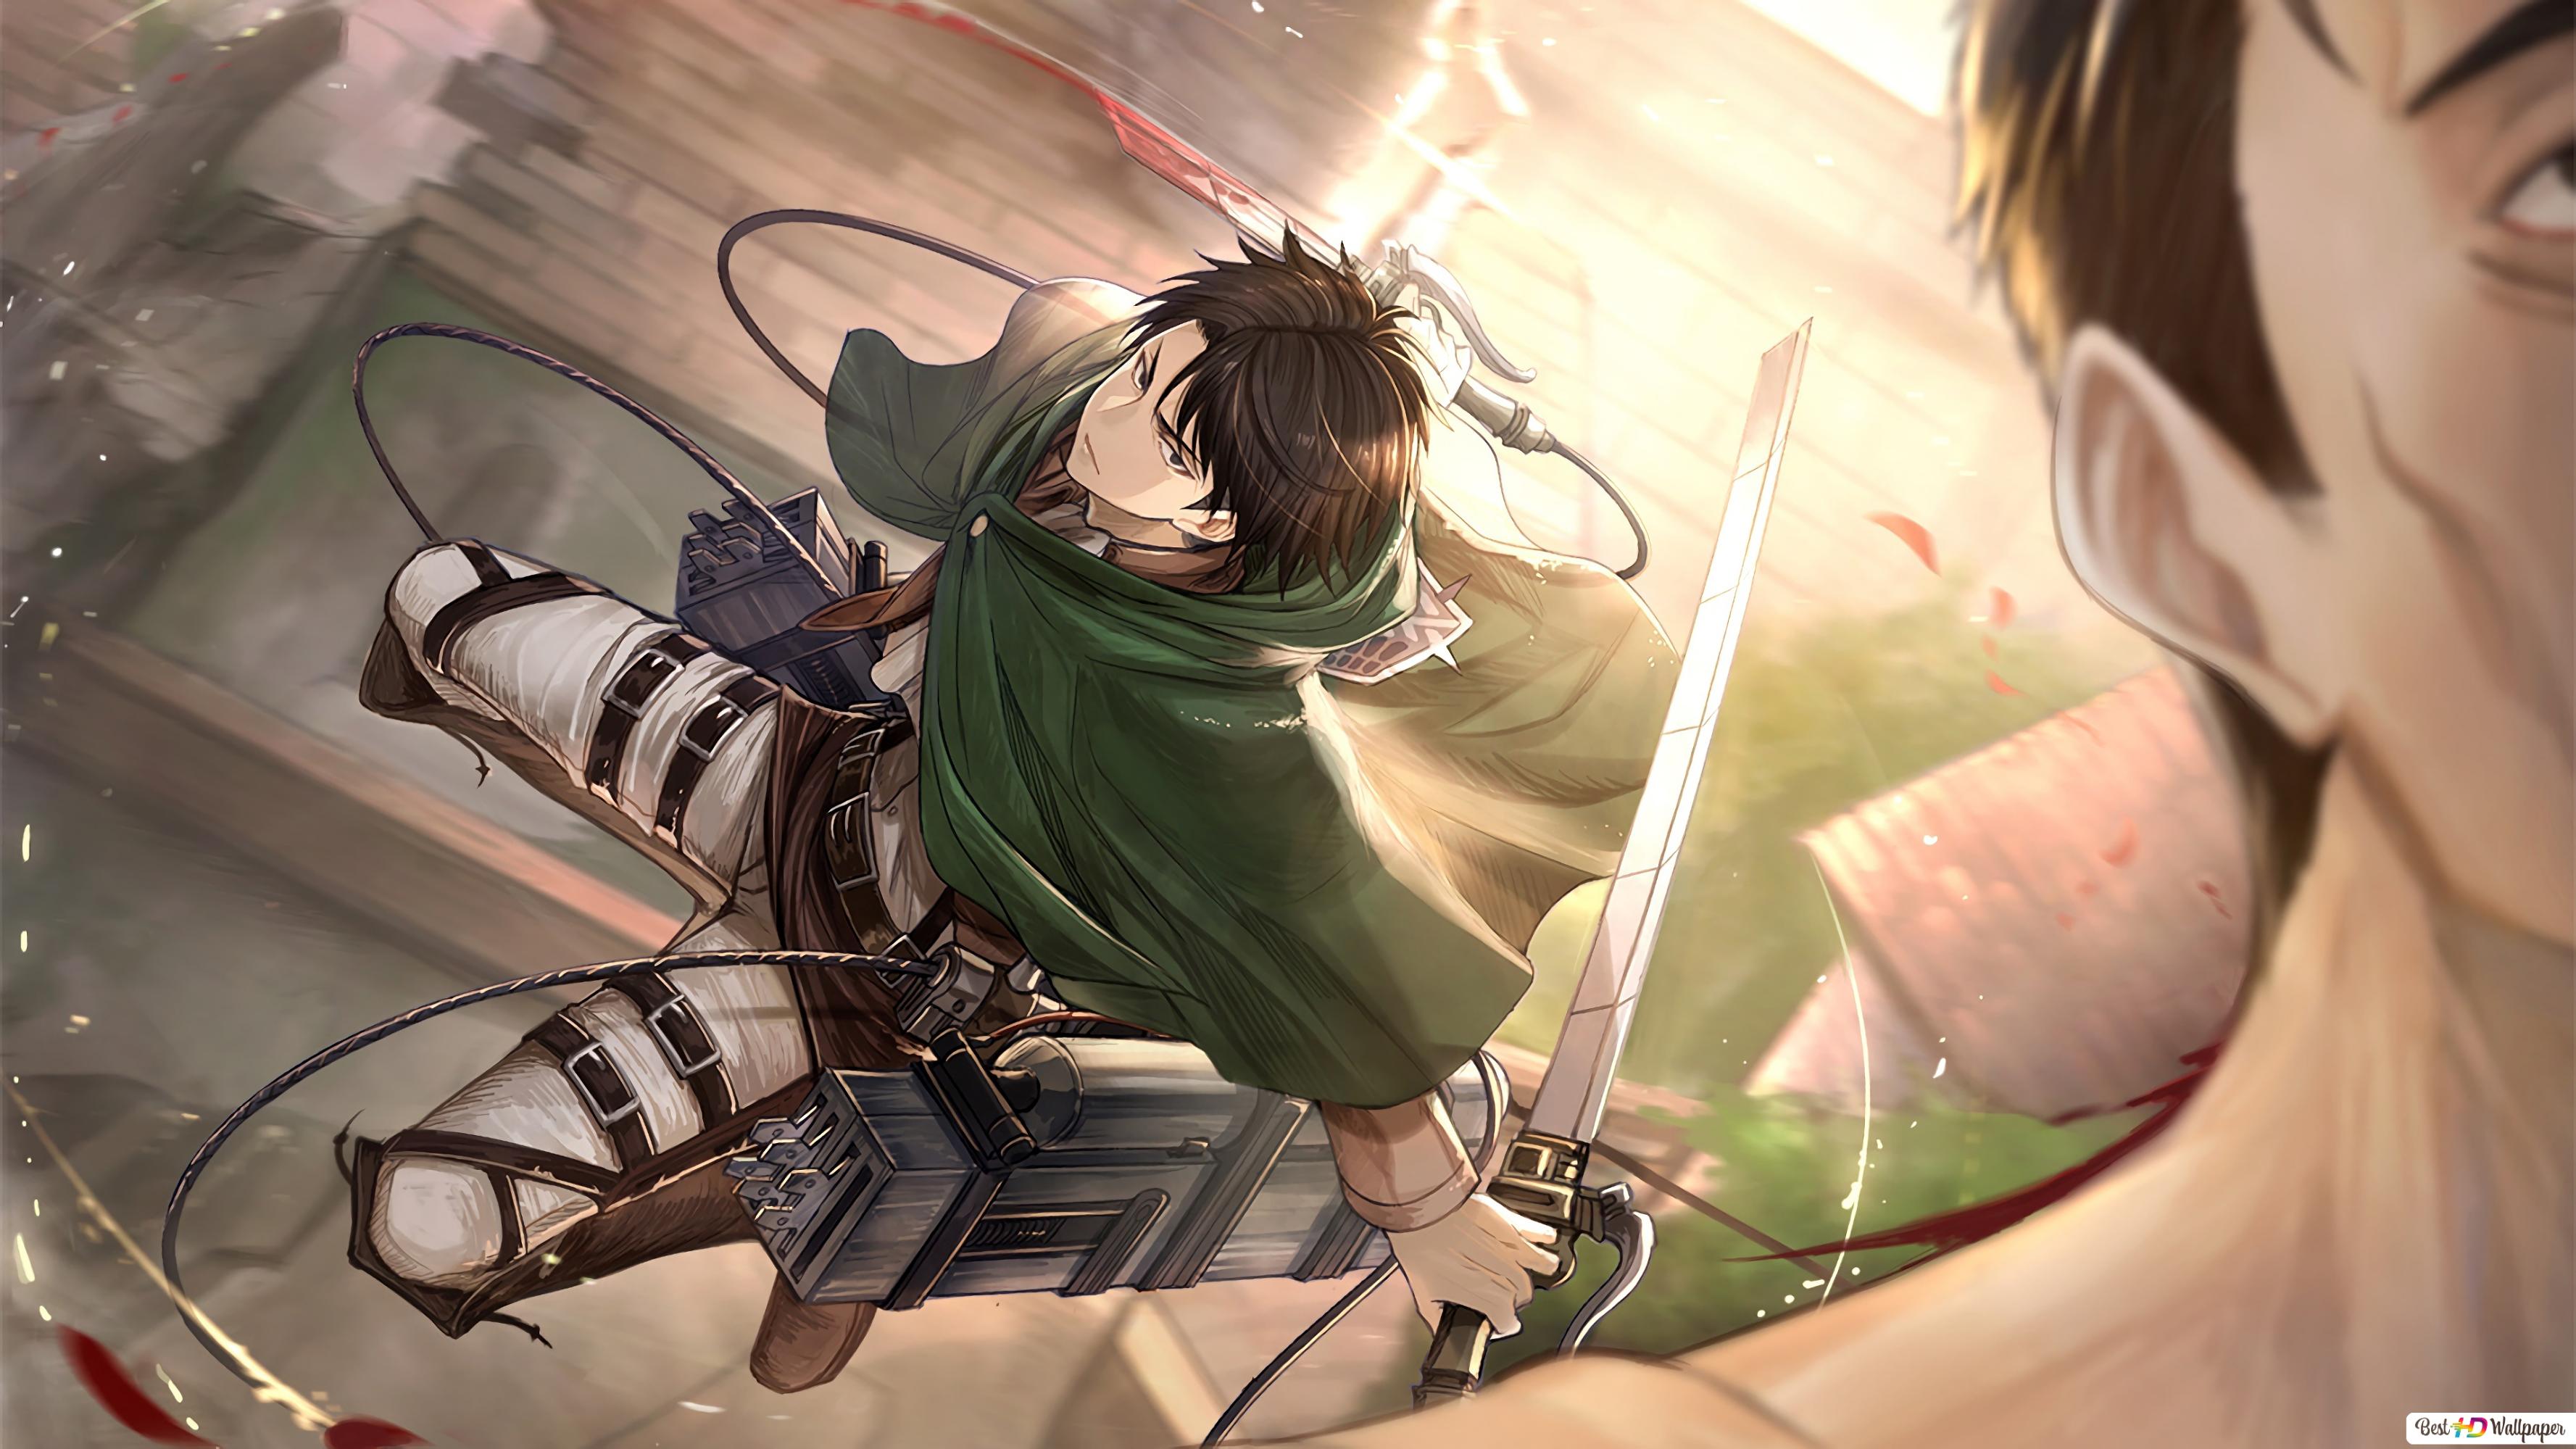 Attack on Titan, Levi Ackerman for the kill HD wallpapers download.